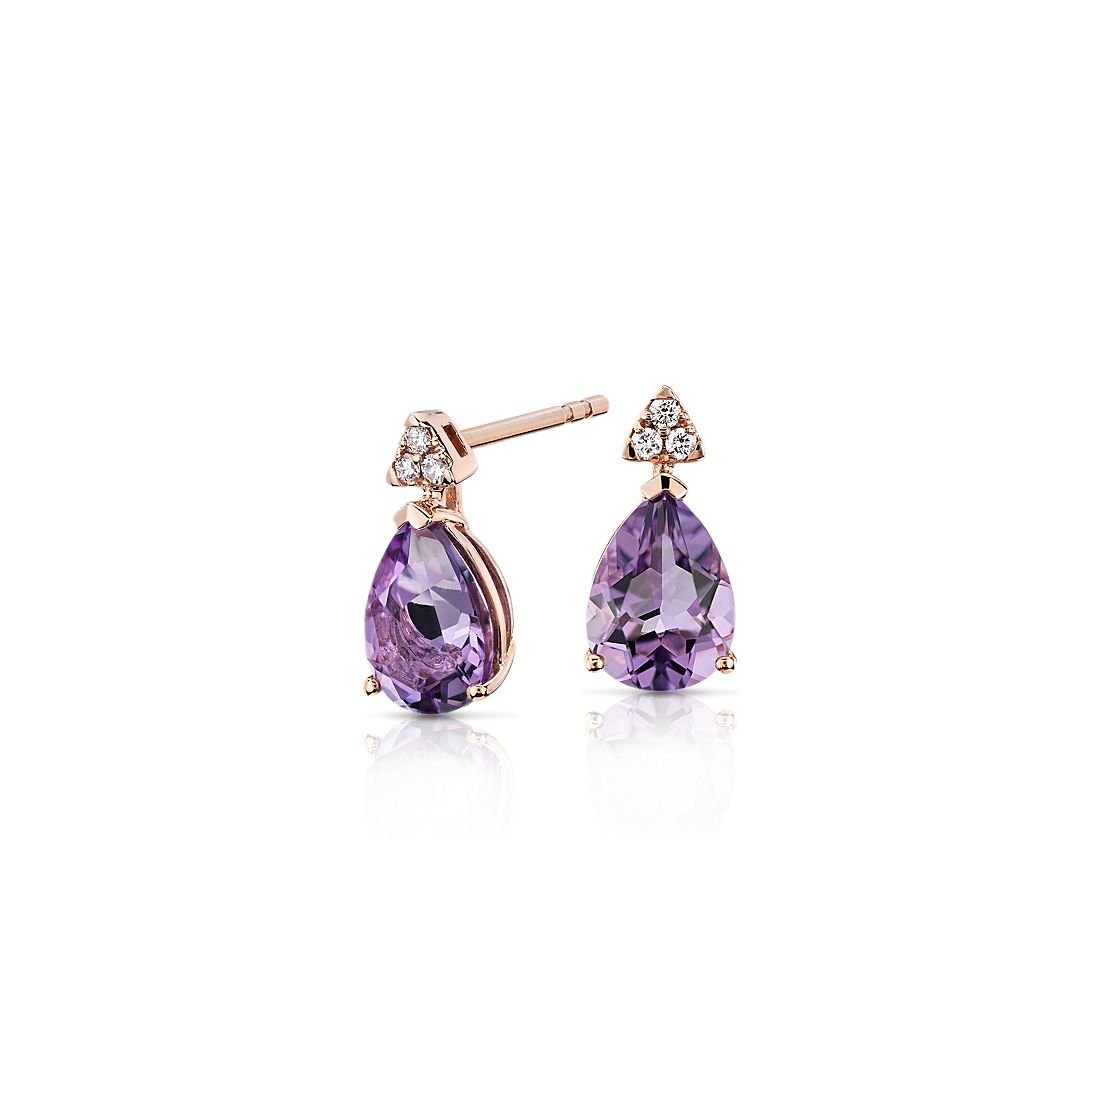 Pear-Shaped Amethyst Earrings with Diamond Trio in 14k Rose Gold (8x6mm)